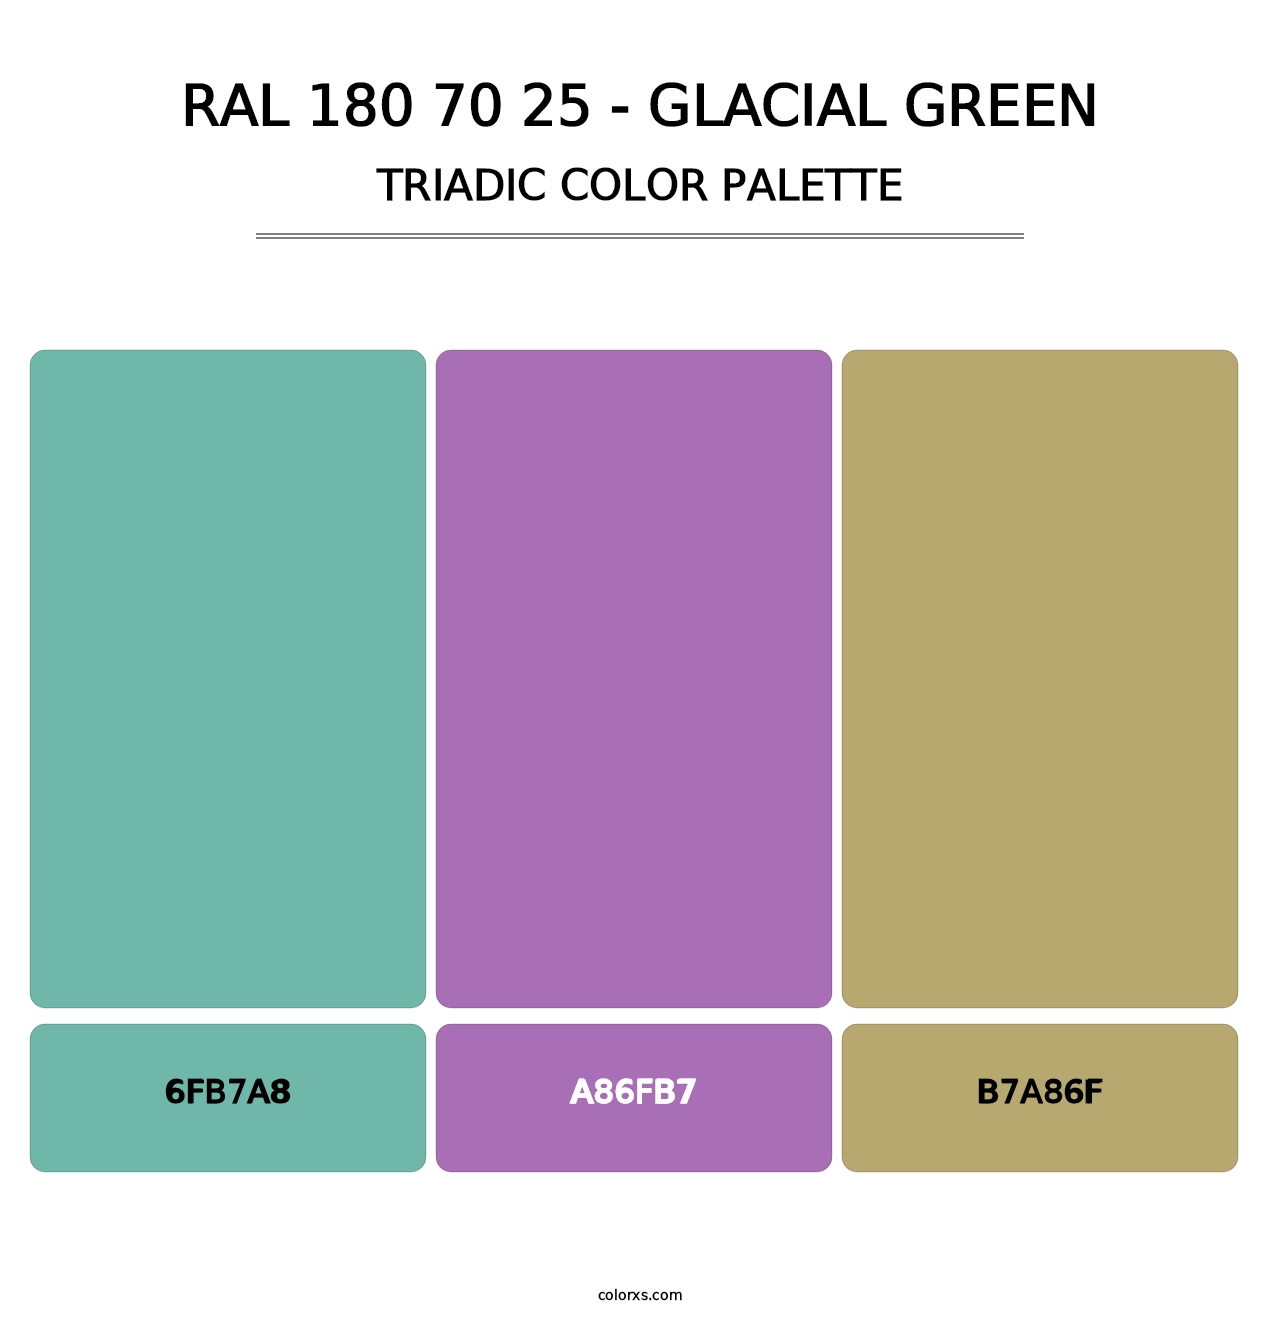 RAL 180 70 25 - Glacial Green - Triadic Color Palette